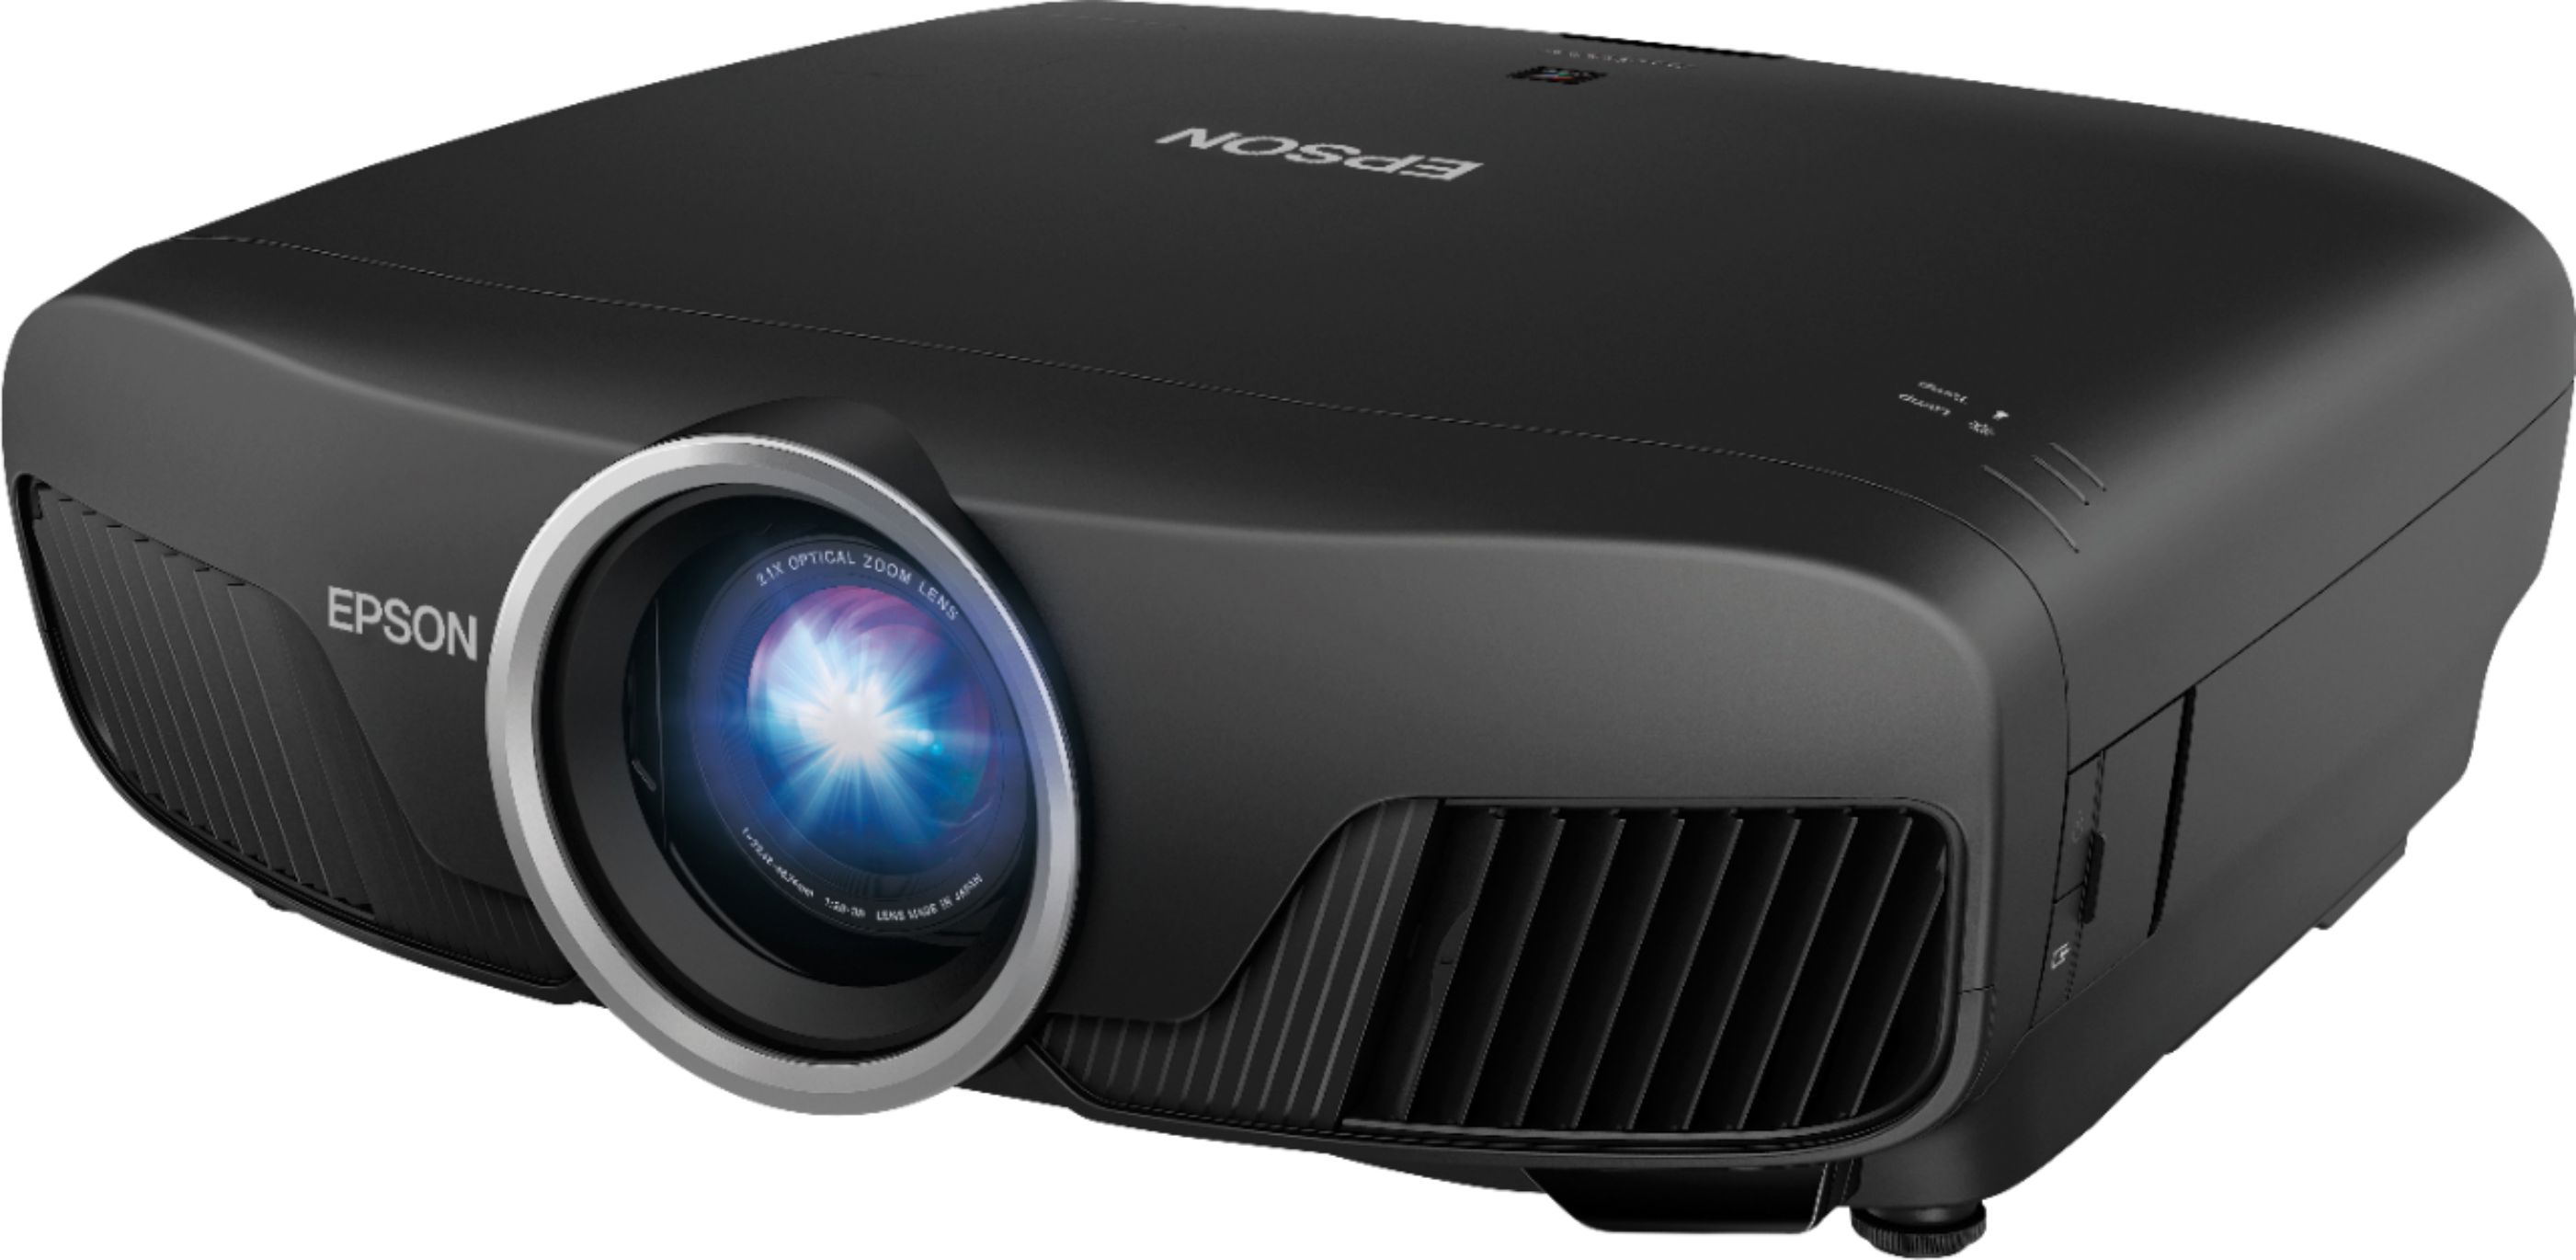 Epson Pro Cinema 4050 4K PRO-UHD 3LCD Projector with High Dynamic 